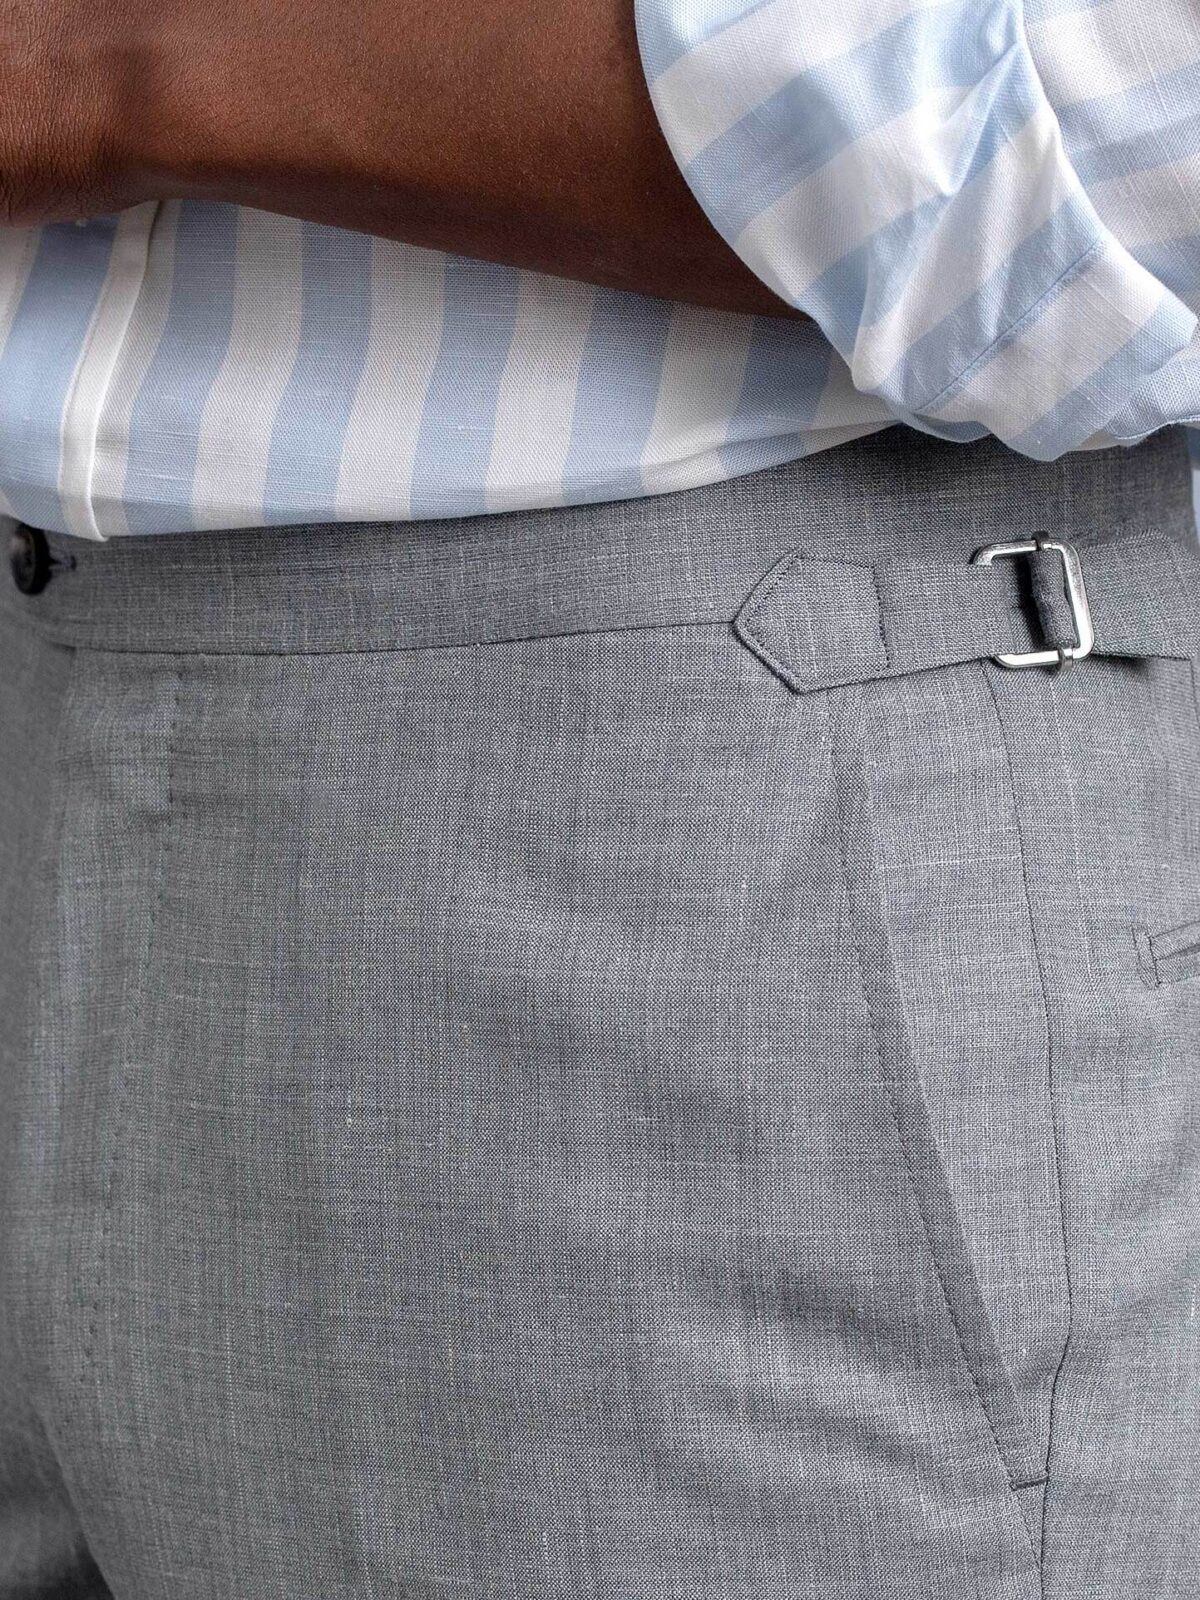 Belt Loops Vs. Side Adjusters: Which do You Choose?